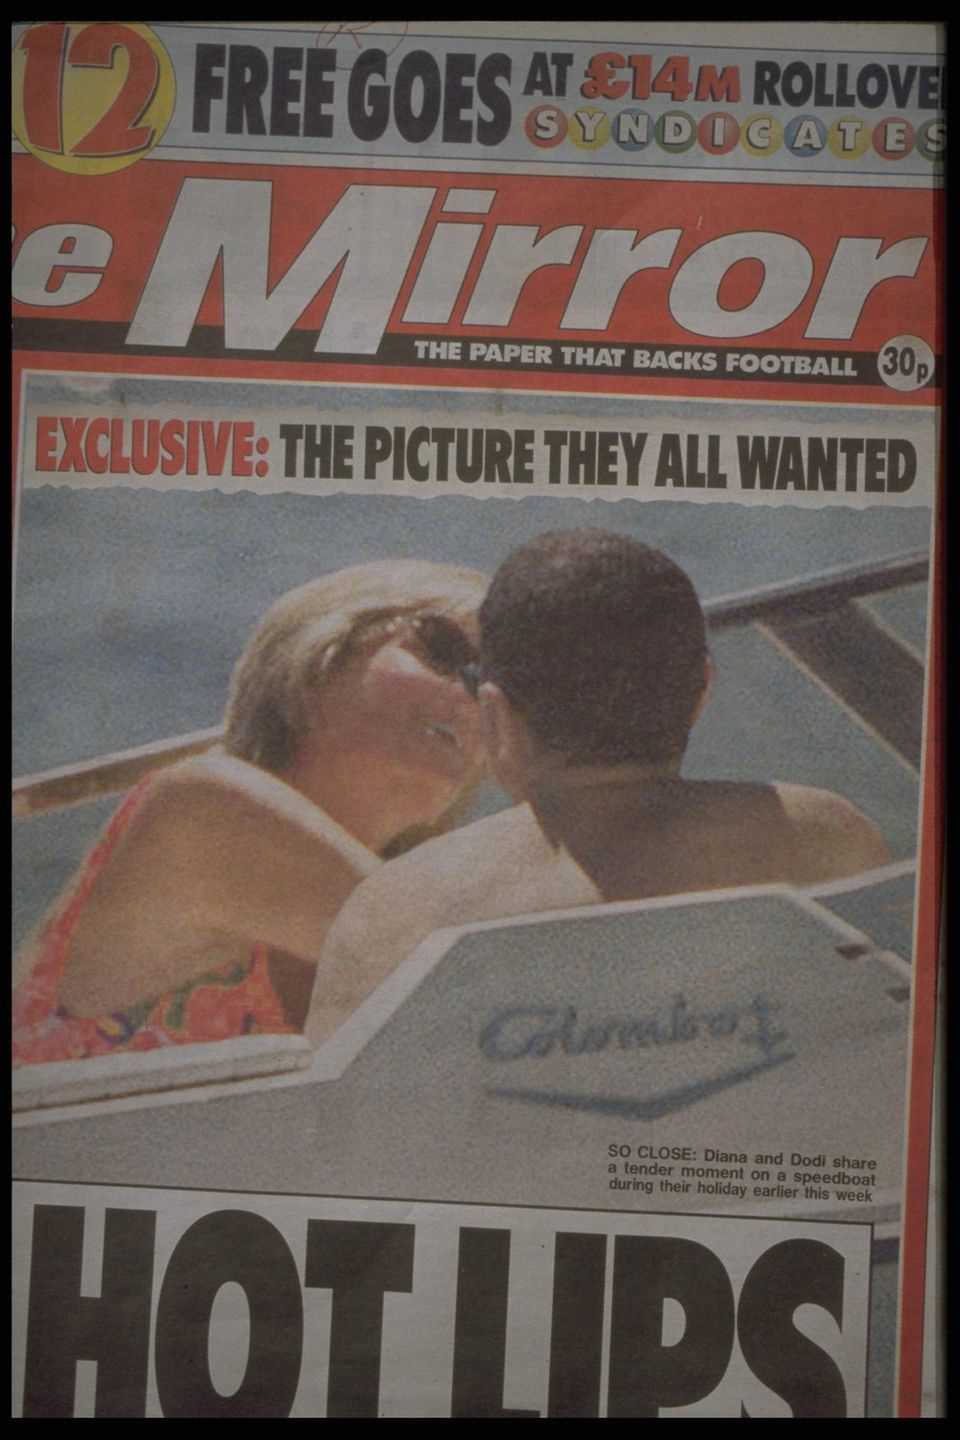 The British press is crazy about Diana and Dodi.